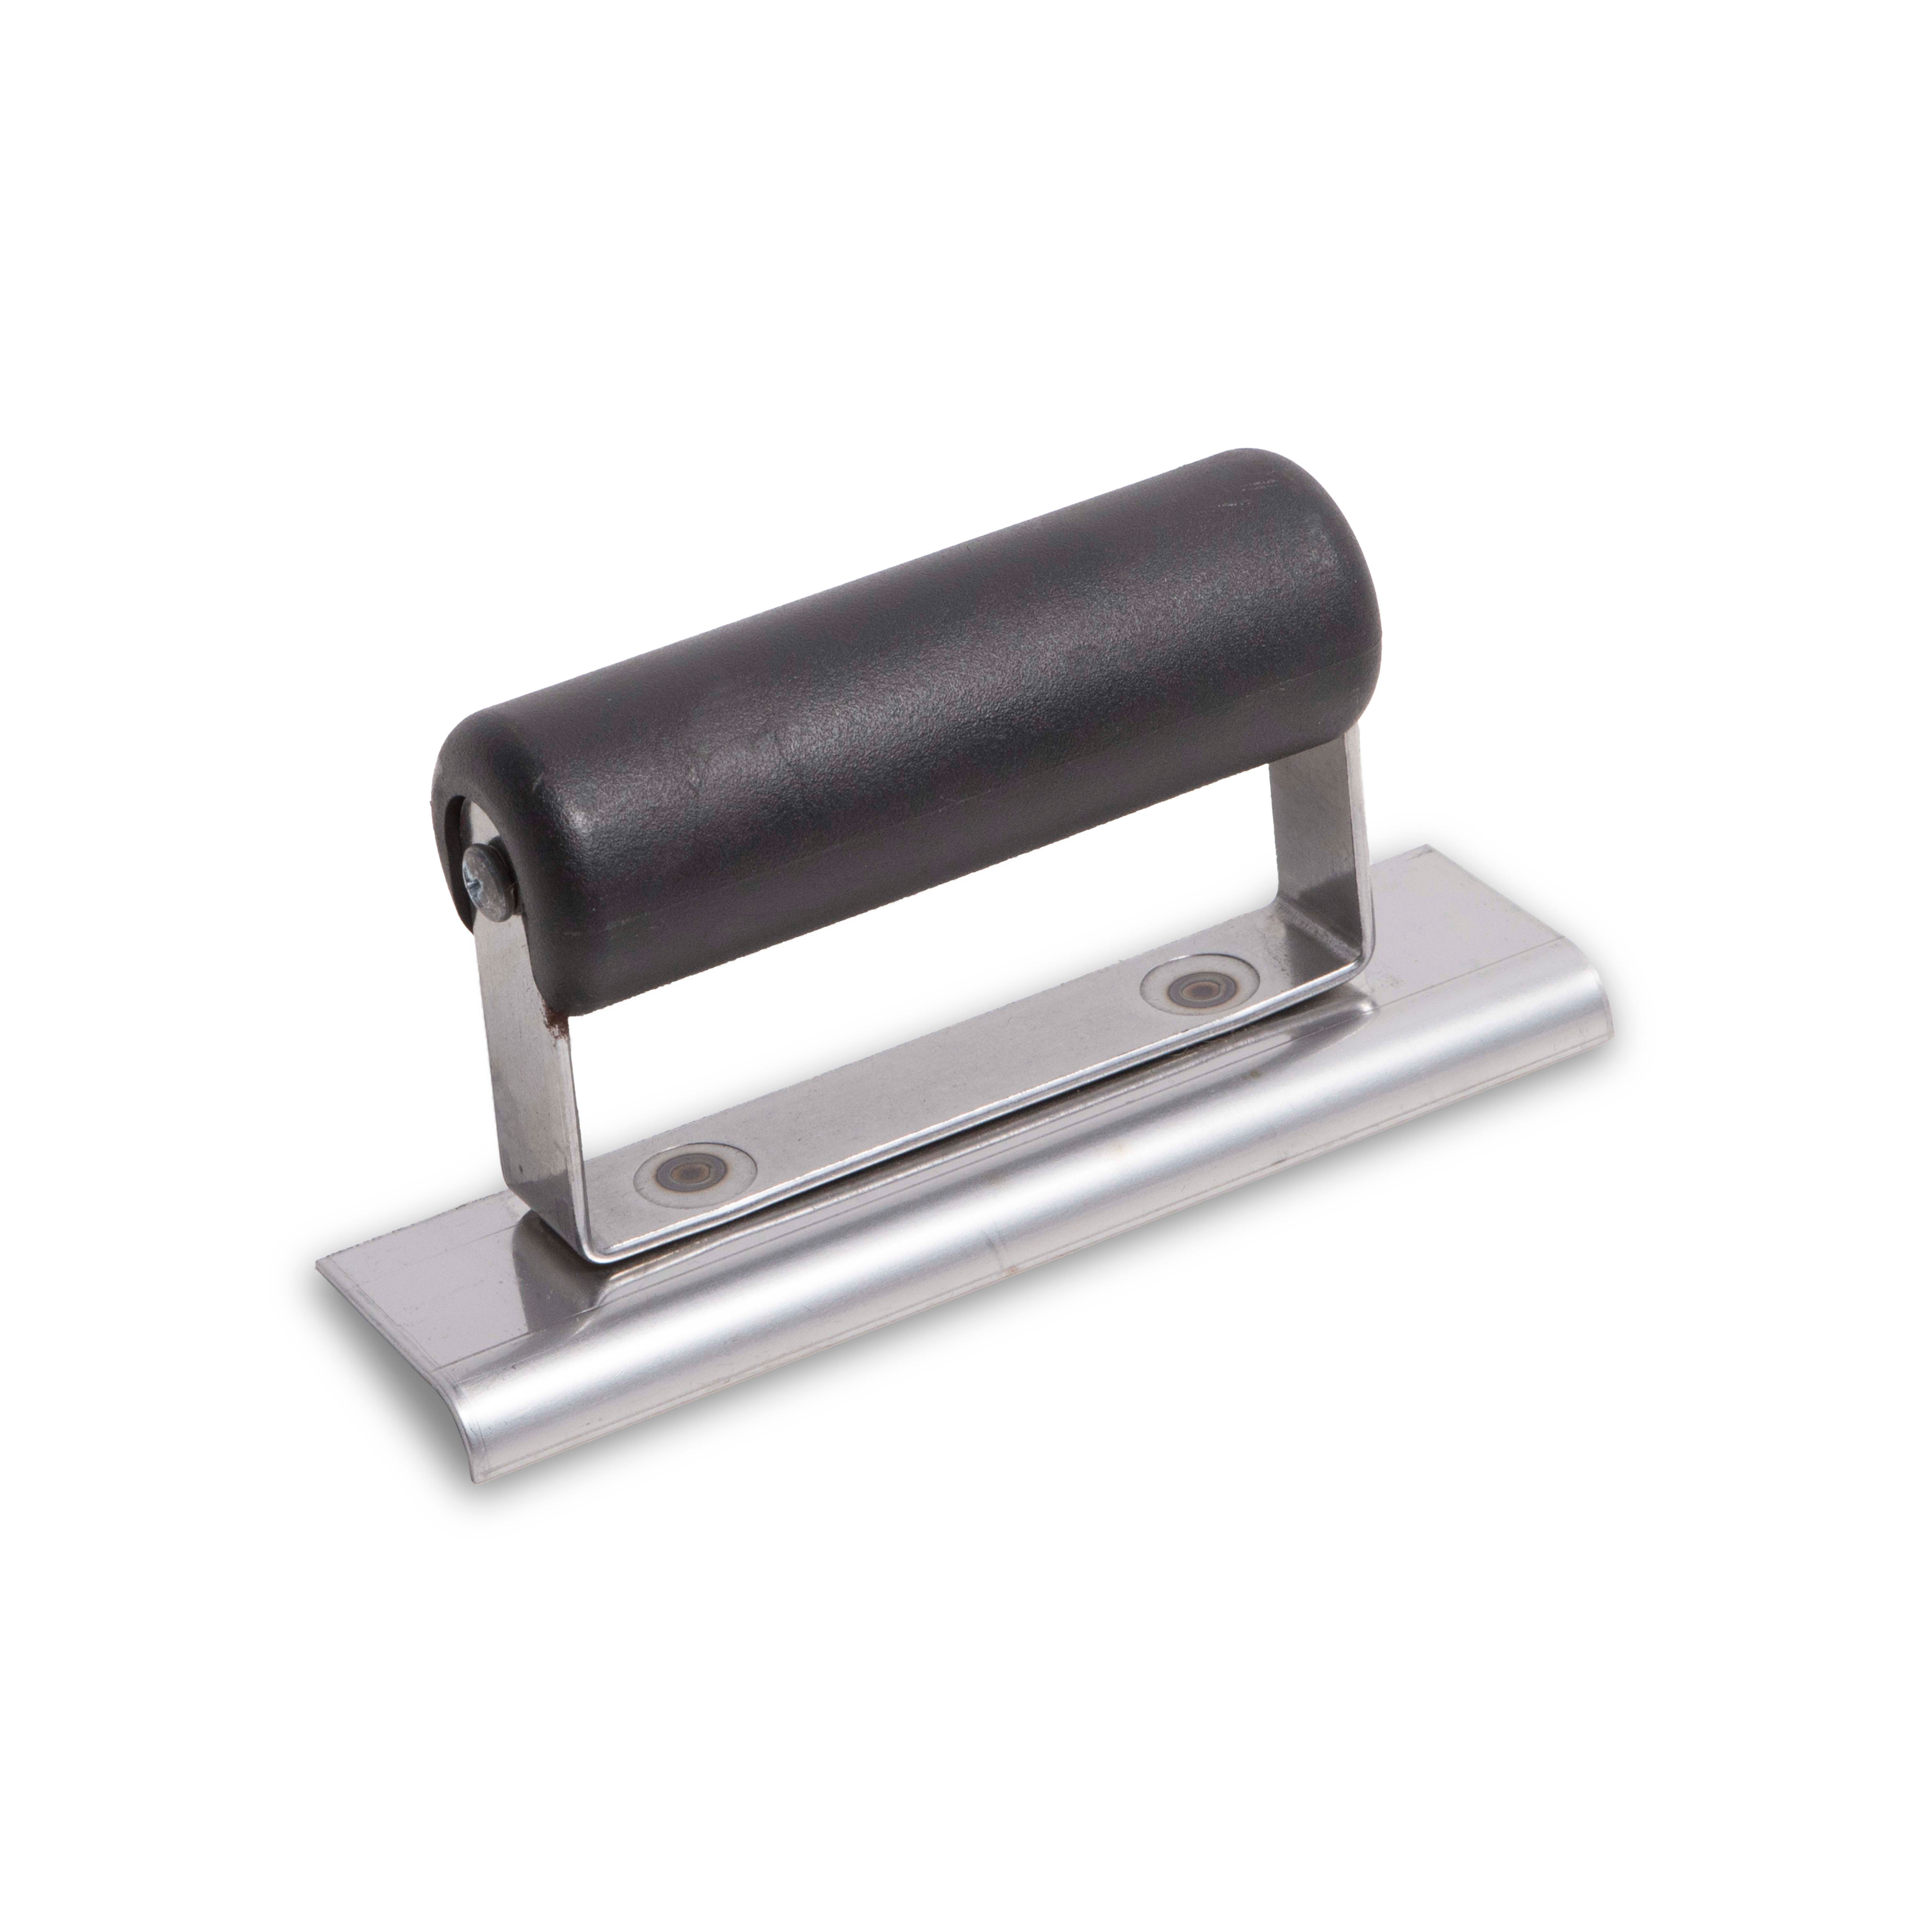 Marshalltown - QLT CE502SP 6in x 2-1/2in Stainless Steel Edger; 1/4R, 3/8L-Plastic Handle CE502SP